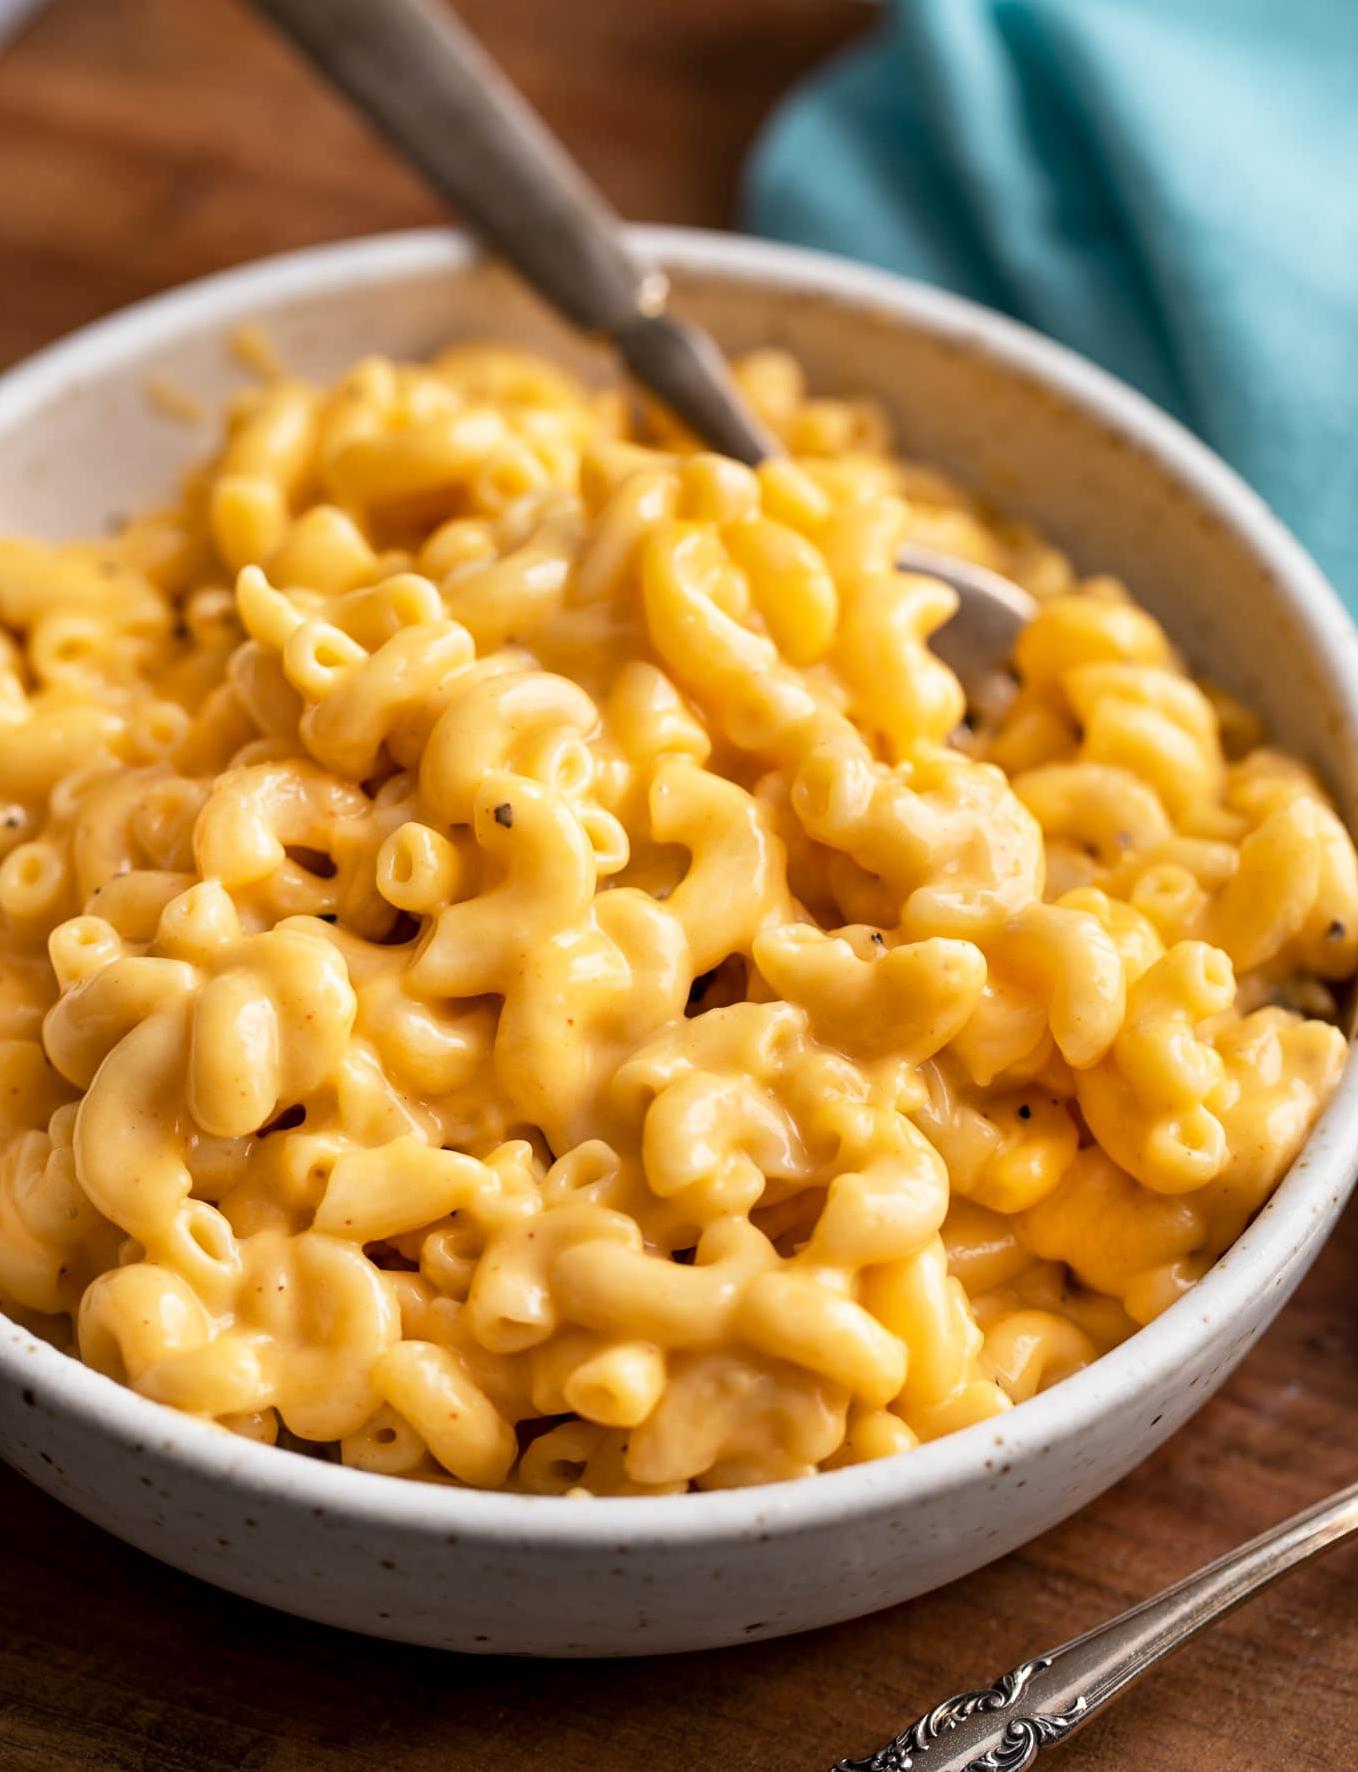  Say cheese! This mac and cheese is Insta-worthy.